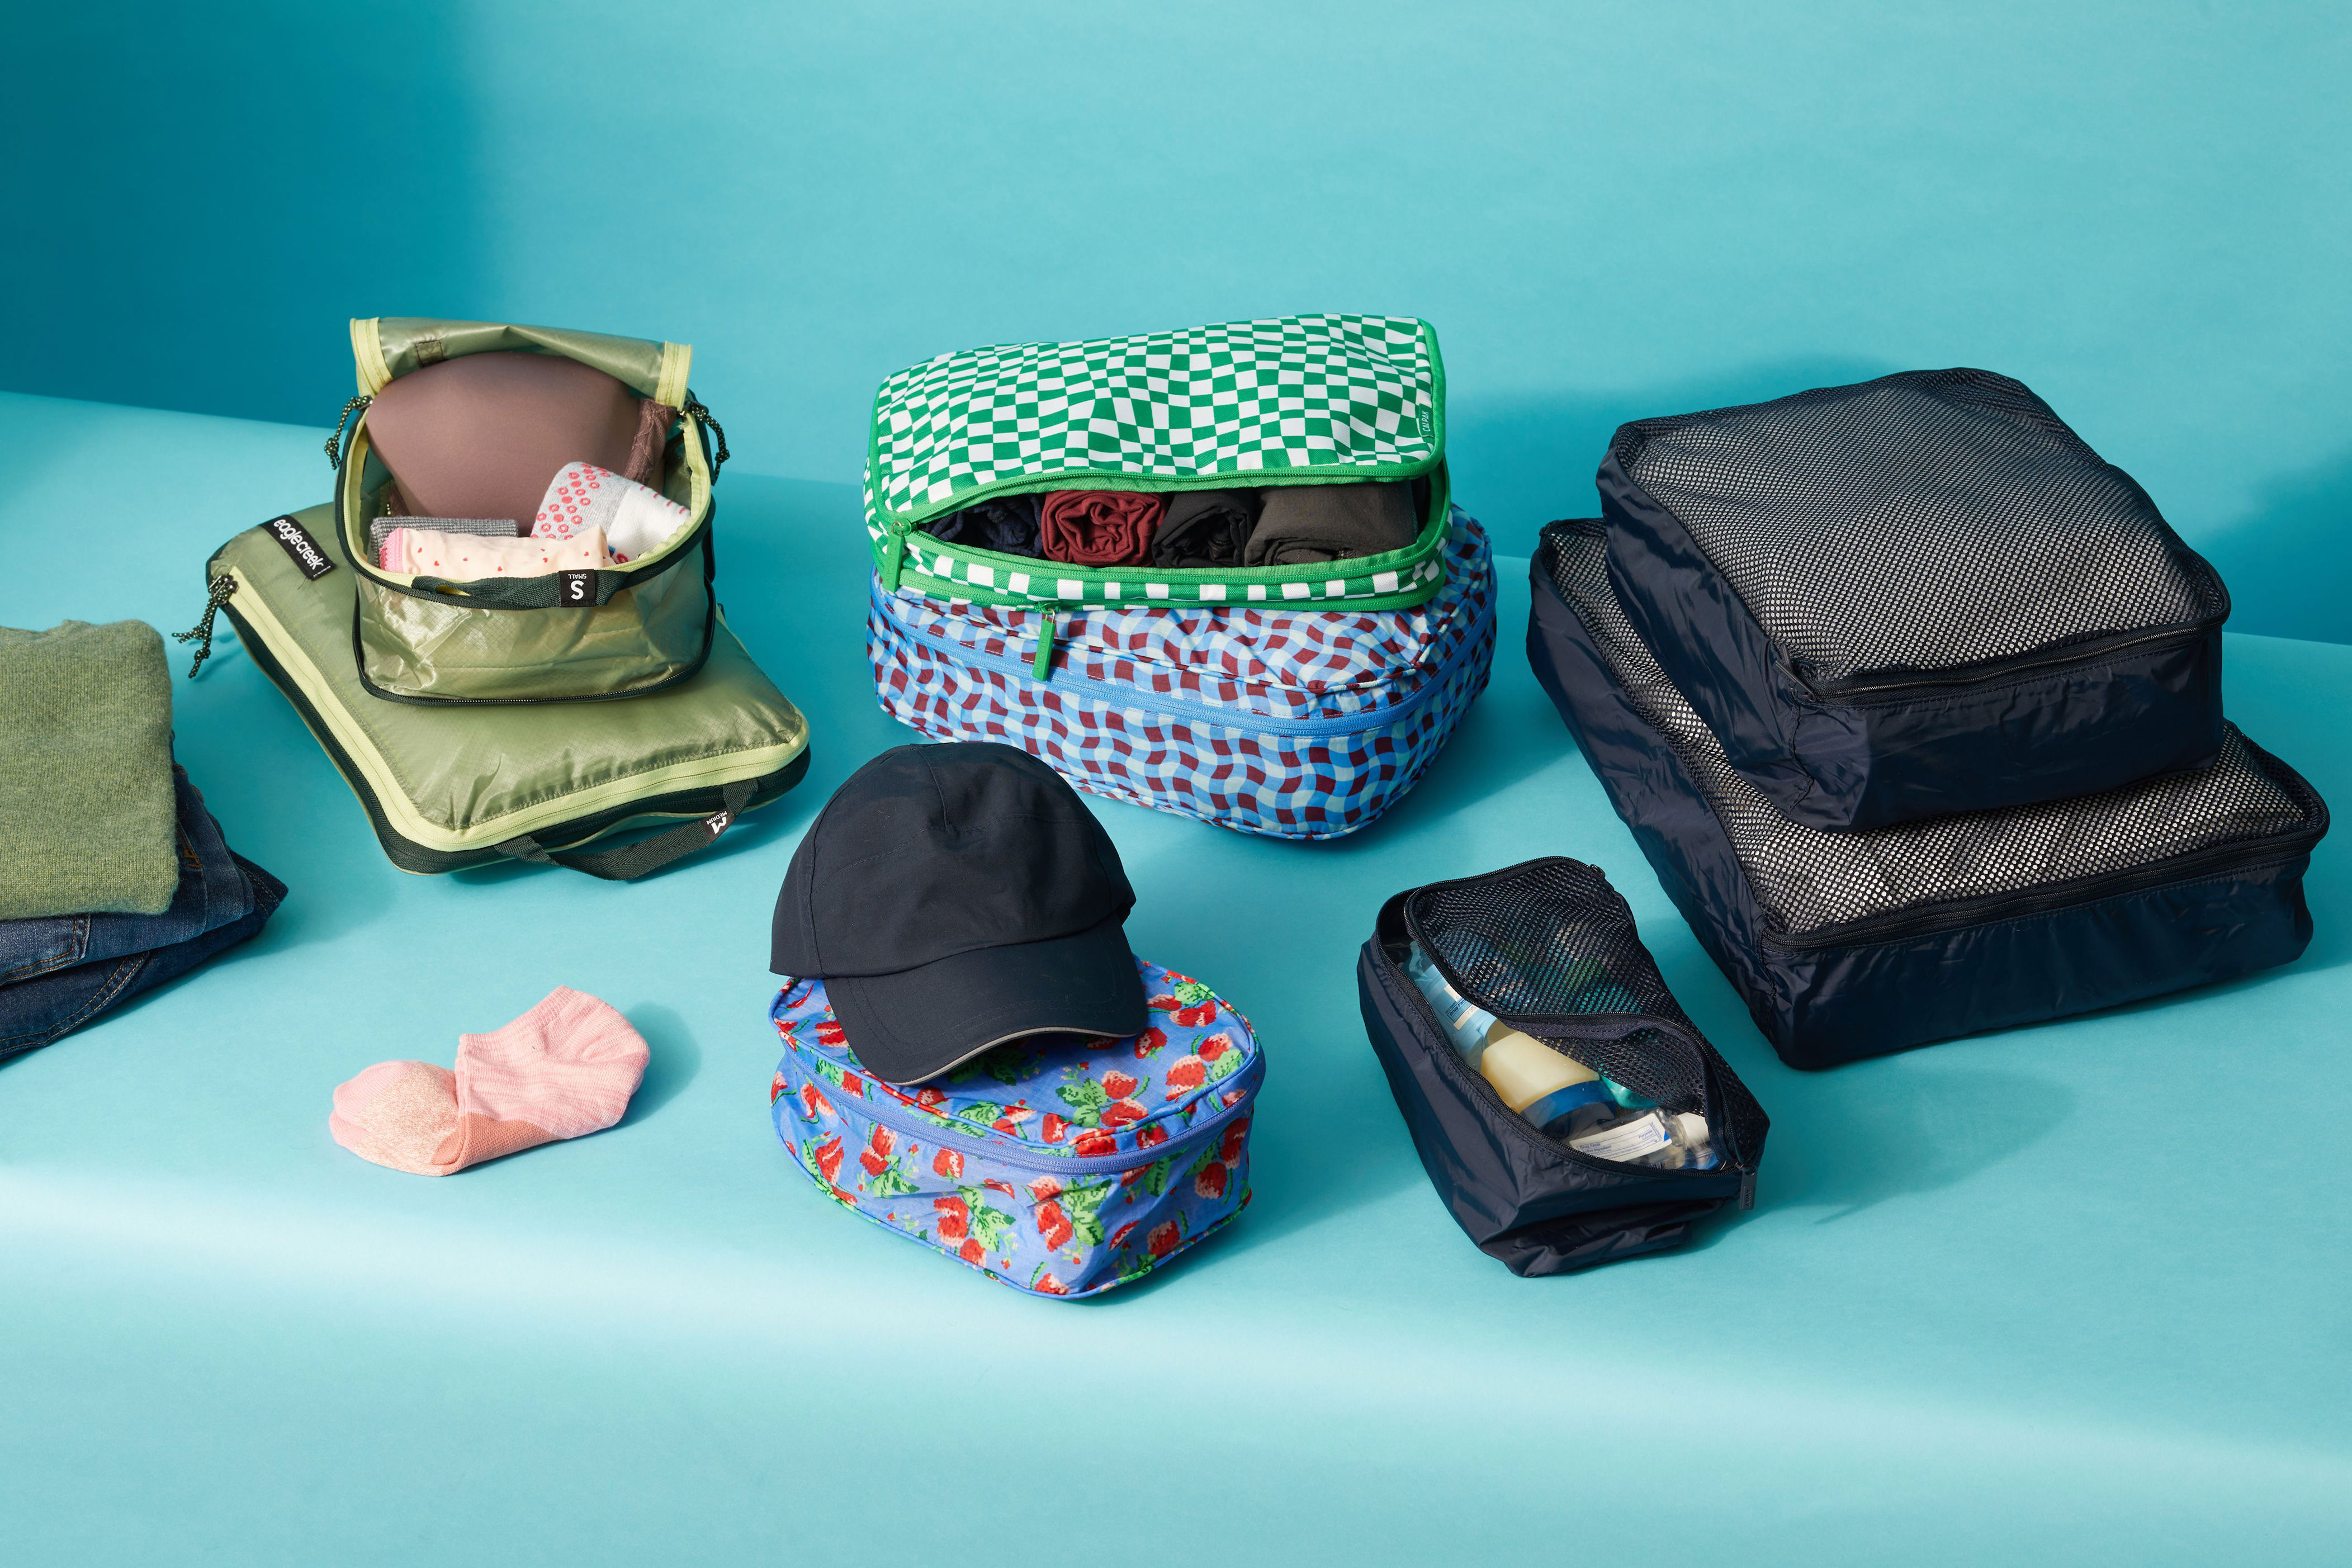 <p>Packing before a trip can feel incredibly daunting: How will I fit everything in my <a href="https://www.goodhousekeeping.com/travel-products/luggage-reviews/g20709039/best-carry-on-luggage-reviews/">carry-on</a>? How will I keep my suitcase organized while traveling? Packing cubes help solve many of your packing woes by offering convenient organization during the trip <em>and</em> once you get to your destination. <a href="https://www.goodhousekeeping.com/life/a27056659/packing-tips/">Pack your clothes</a> into the cubes first, then fit the pieces into your bag like a puzzle. You can even get ones with built-in compression, so squeezing in that extra outfit (or two!) is no big deal. Whether you're using a carry-on, <a href="https://www.goodhousekeeping.com/travel-products/g26669675/underseat-luggage/">underseat suitcase</a> or <a href="https://www.goodhousekeeping.com/travel-products/luggage-reviews/g45081417/best-weekender-bags/">weekender bag</a>, packing cubes are the ultimate travel MVP to keep your <a href="https://www.goodhousekeeping.com/travel-products/g26898407/best-luggage-brands/">luggage</a> totally organized. </p><p>The <a href="https://www.goodhousekeeping.com/institute/about-the-institute/a19748212/good-housekeeping-institute-product-reviews/">Good Housekeeping Institute</a> Textiles Lab is comprised of fiber scientists and travel product experts who test all types of luggage, <a href="https://www.goodhousekeeping.com/life/travel/g26740080/best-travel-gadgets/">travel accessories</a> and more. We put packing cubes to the test in our Lab and had <a href="https://www.goodhousekeeping.com/institute/about-the-institute/a36050588/gh-institute-product-tester/">consumer testers</a> use them on their vacations. Our testers used these packing cubes all over the world on local road trips, international getaways, camping excursions and more. We put 13 different styles of packing cubes to the test to find<strong> the best packing cubes in 2023.</strong></p>